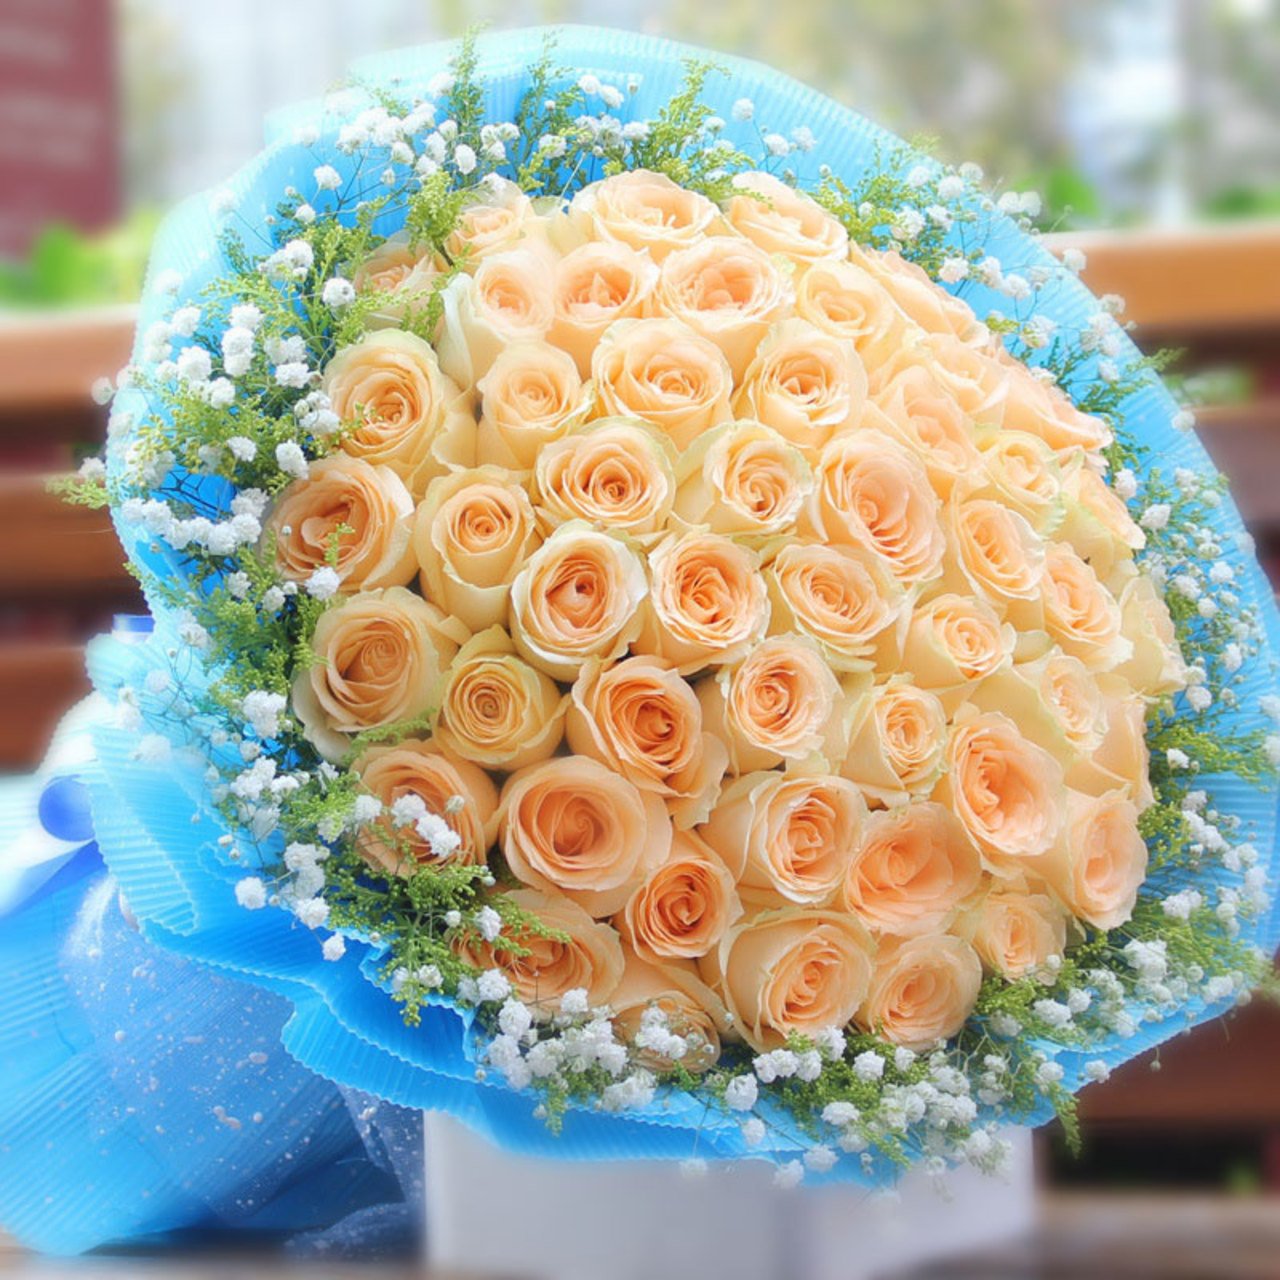 Love forever(
66 boutique champagne roses)